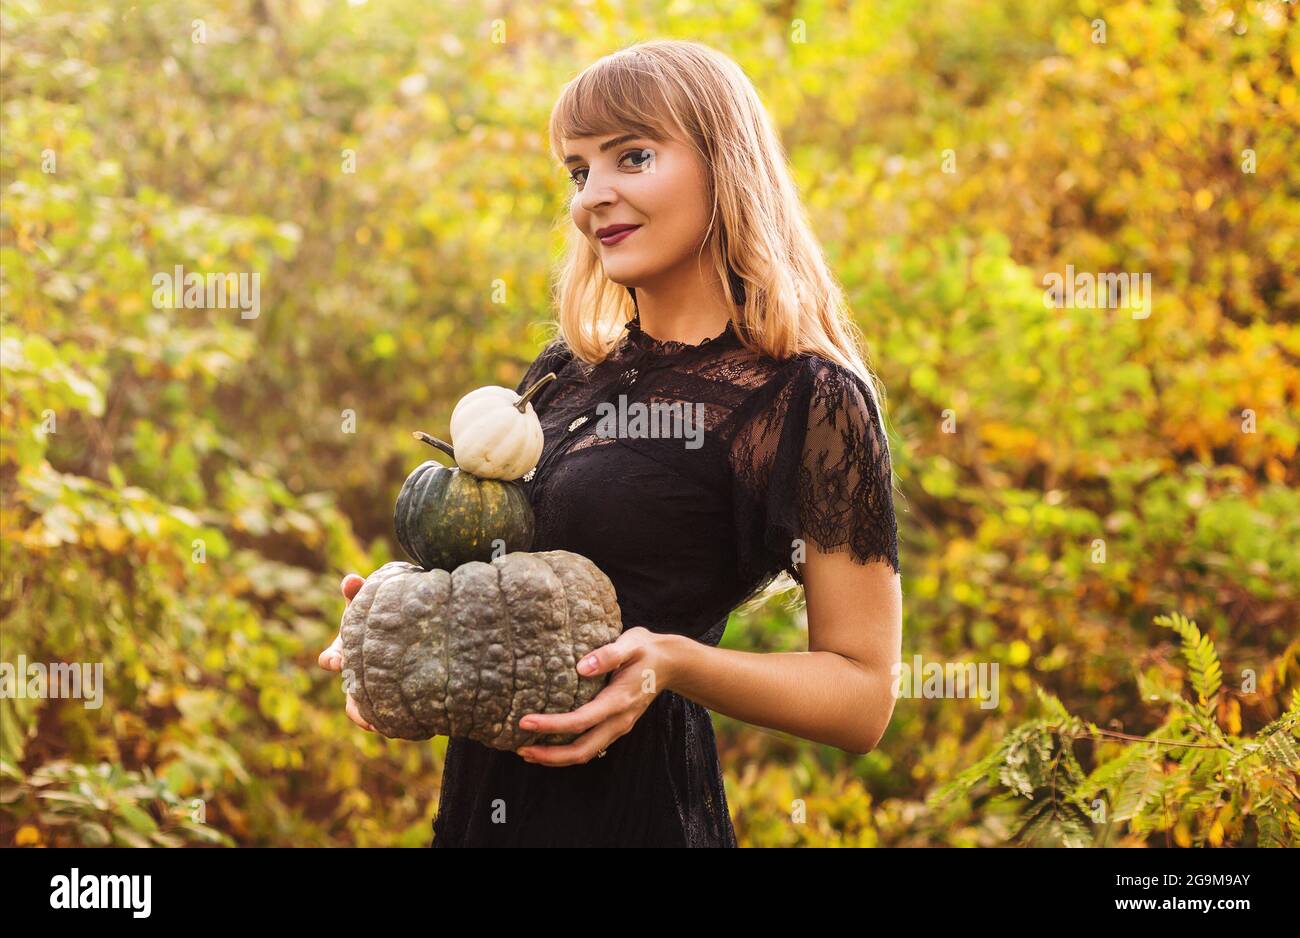 Portrait of beautiful young blond woman with long straight hair and dark vamp makeup looking to the camera, wearing black guipure dress, holding pumpk Stock Photo